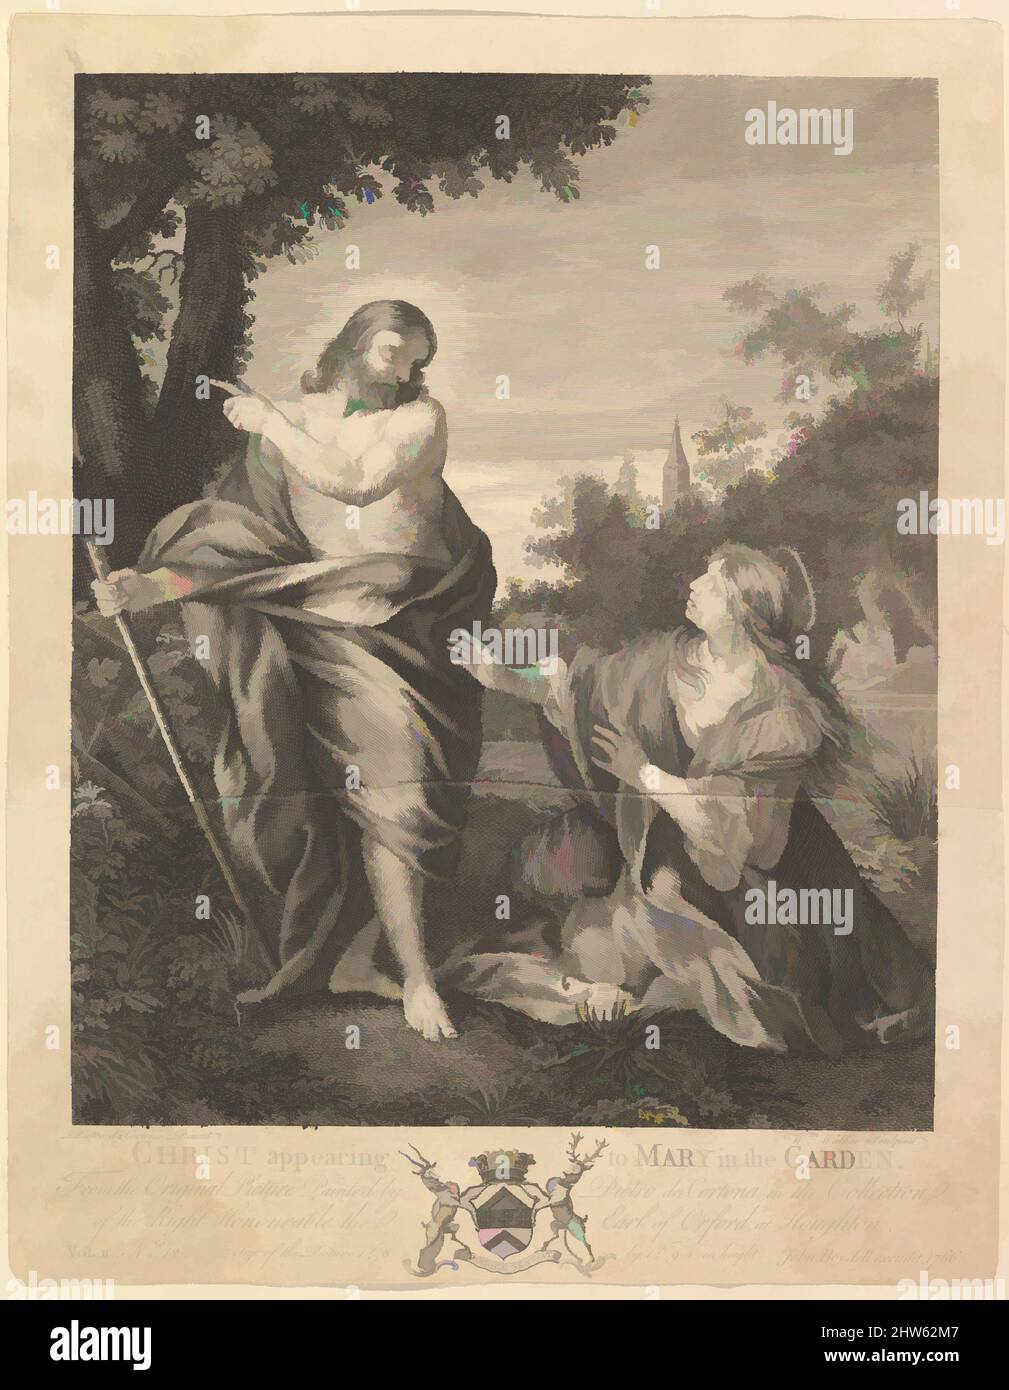 Art inspired by Christ Appearing to Mary in the Garden, before 1766, Engraving, sheet: 12 1/2 x 9 3/4 in. (31.7 x 24.7 cm), Prints, After Pietro da Cortona (Pietro Berrettini) (Italian, Cortona 1596–1669 Rome, Classic works modernized by Artotop with a splash of modernity. Shapes, color and value, eye-catching visual impact on art. Emotions through freedom of artworks in a contemporary way. A timeless message pursuing a wildly creative new direction. Artists turning to the digital medium and creating the Artotop NFT Stock Photo